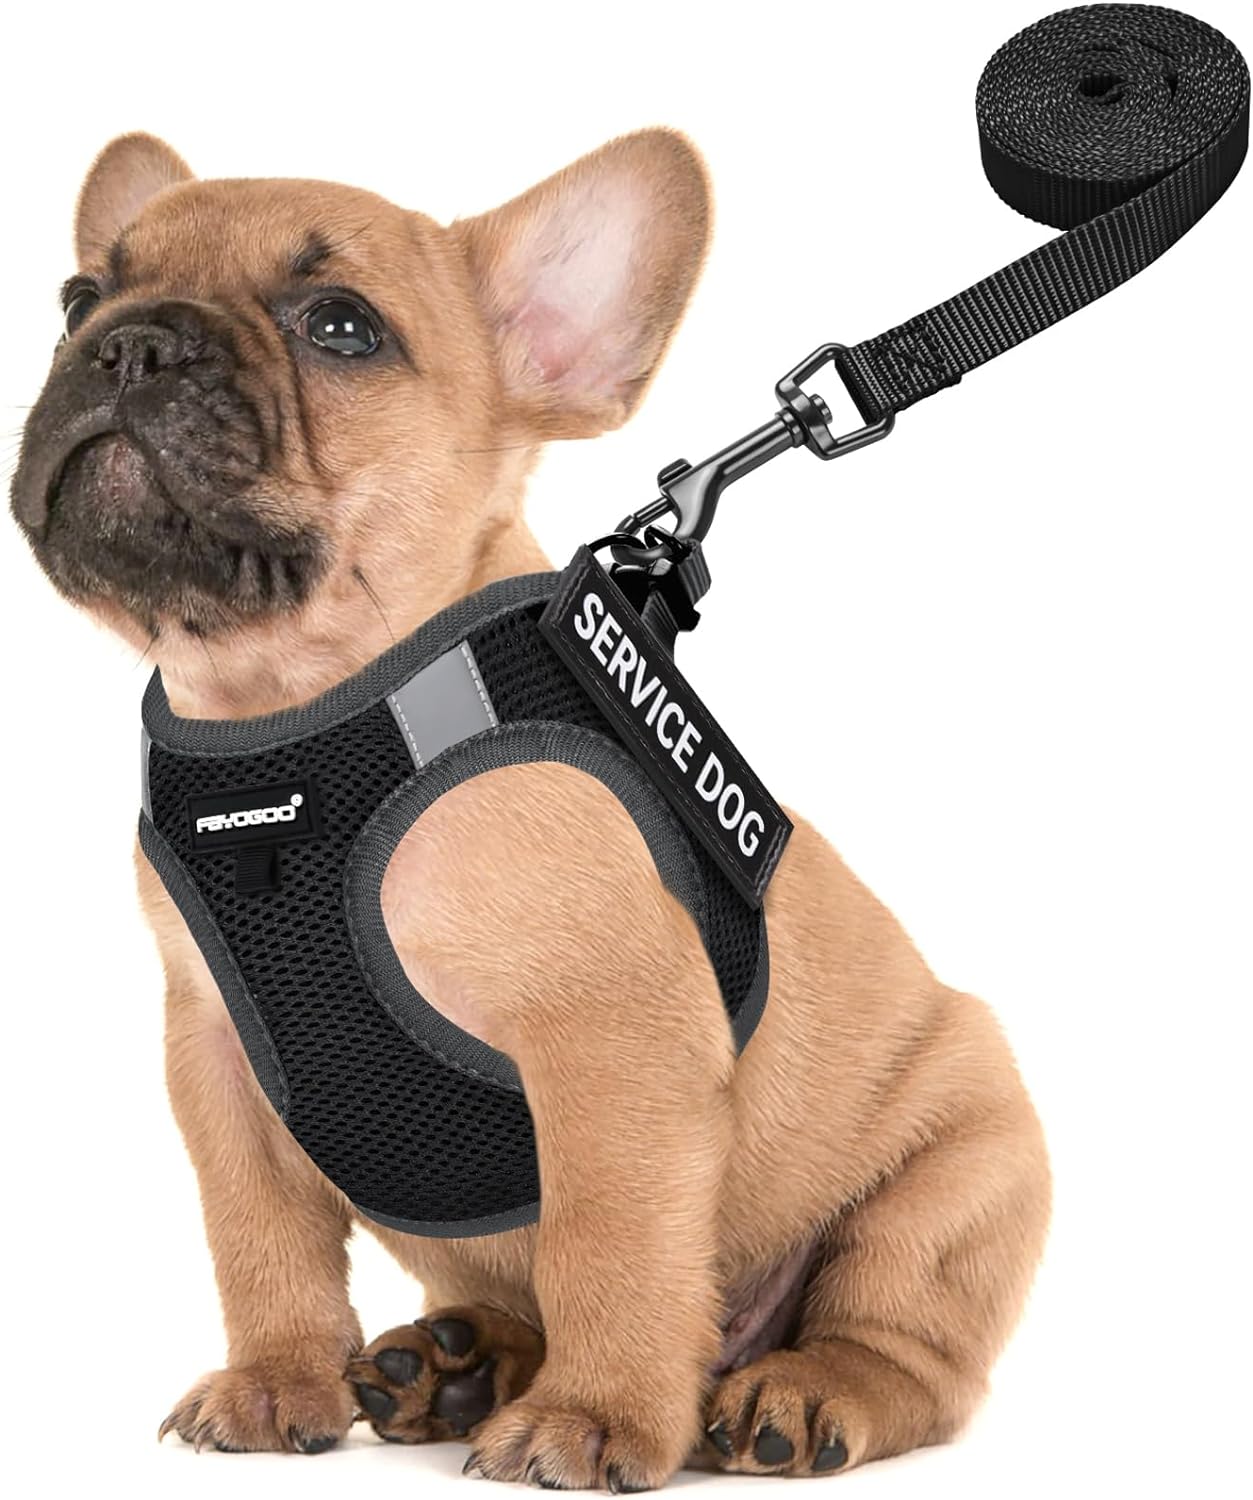 FAYOGOO Service Dog Vest for Small and Medium Breed - Lightweight Dog Harness with 3PCS Removable Patches - Puppy Harness for Walking,Training